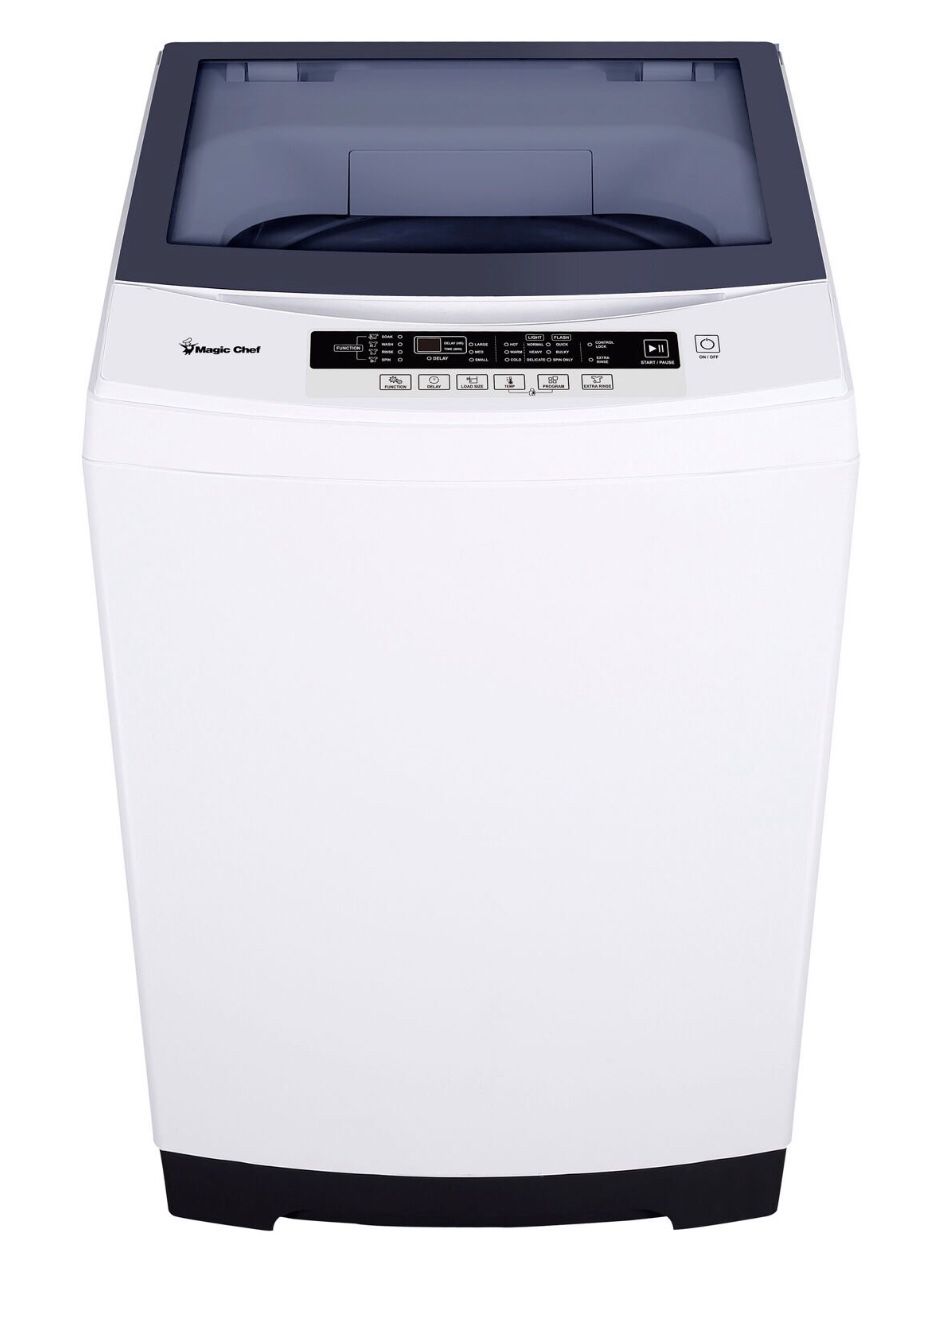 Magic Chef Compact 3-cu. ft. top-load washer